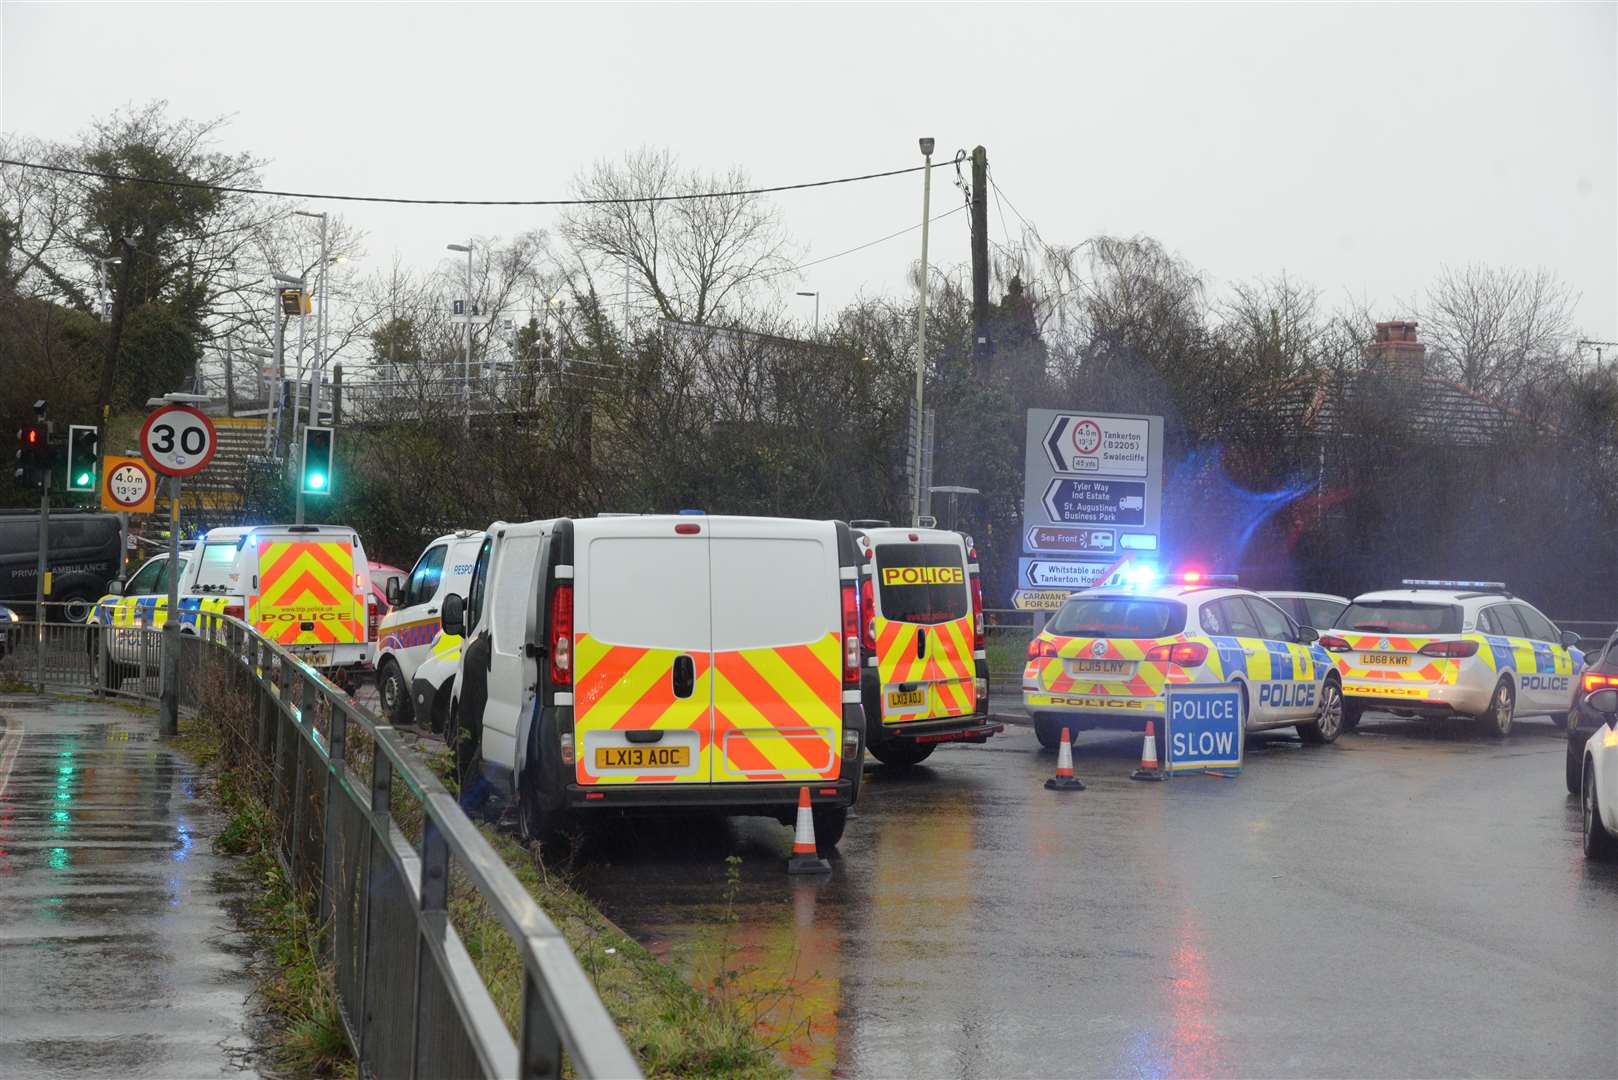 The scene at Chestfield and Swalecliffe railway station following a fatality. Picture: Chris Davey